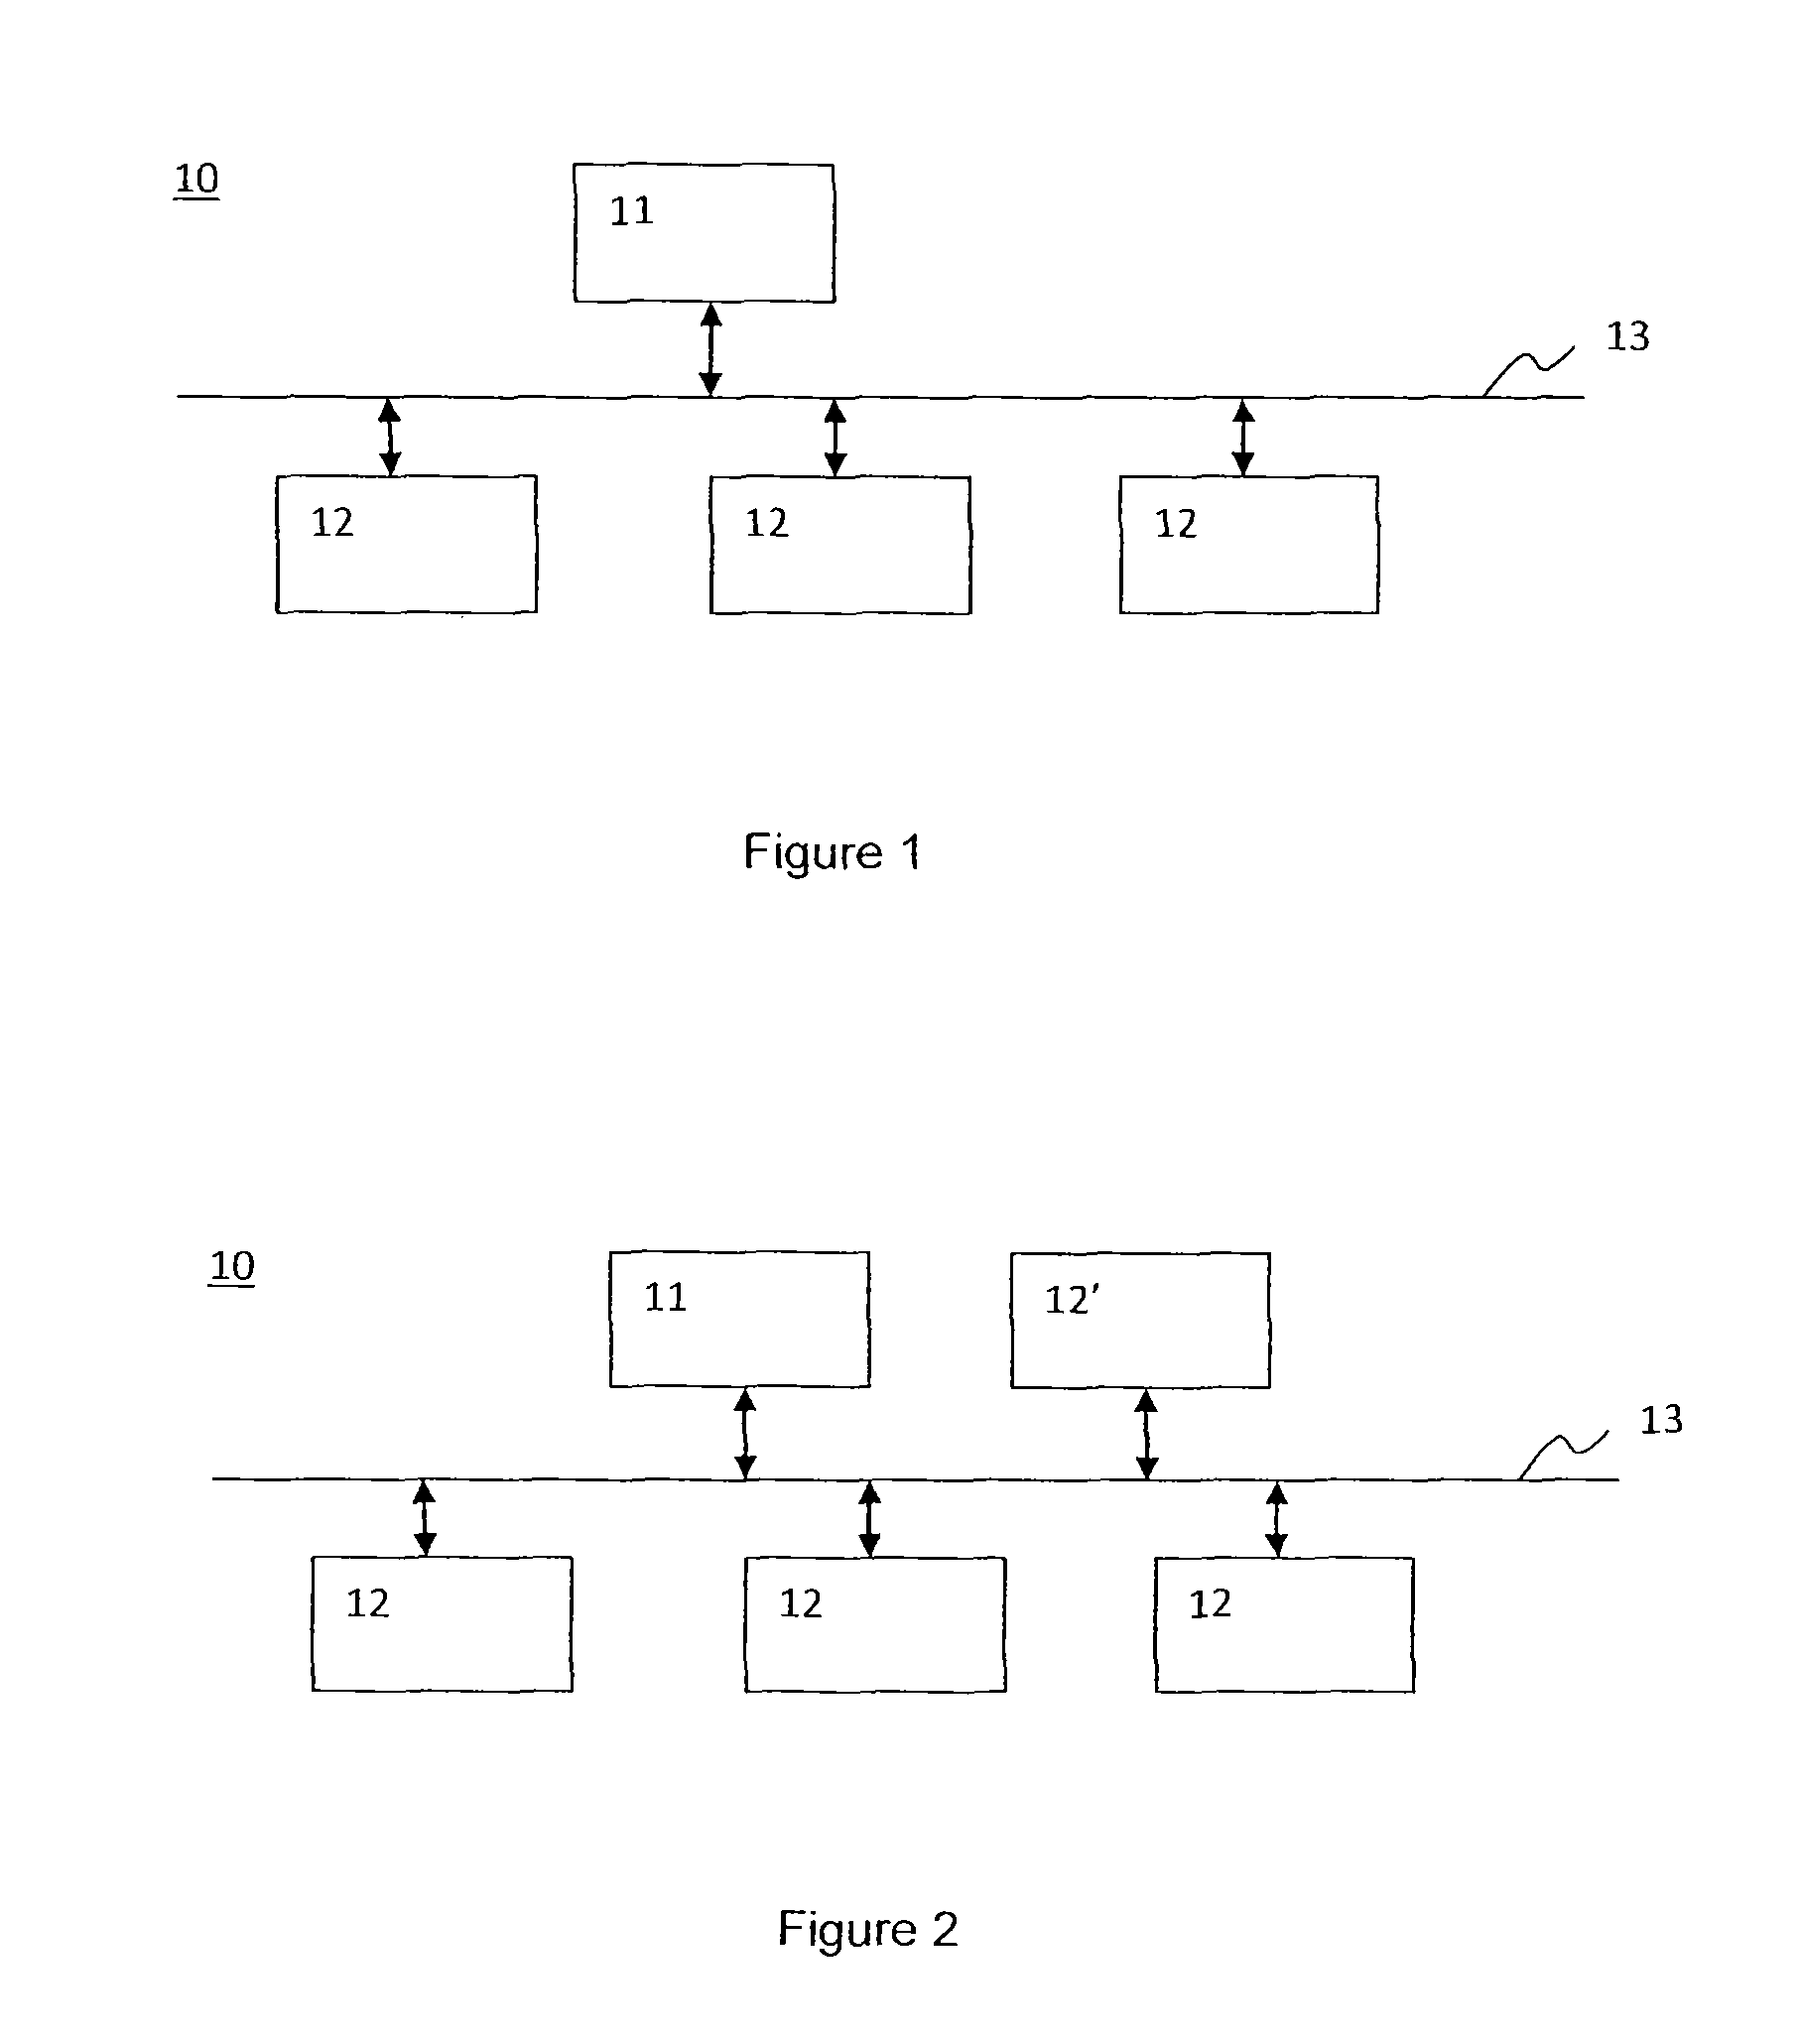 Recommender systems and methods using modified alternating least squares algorithm